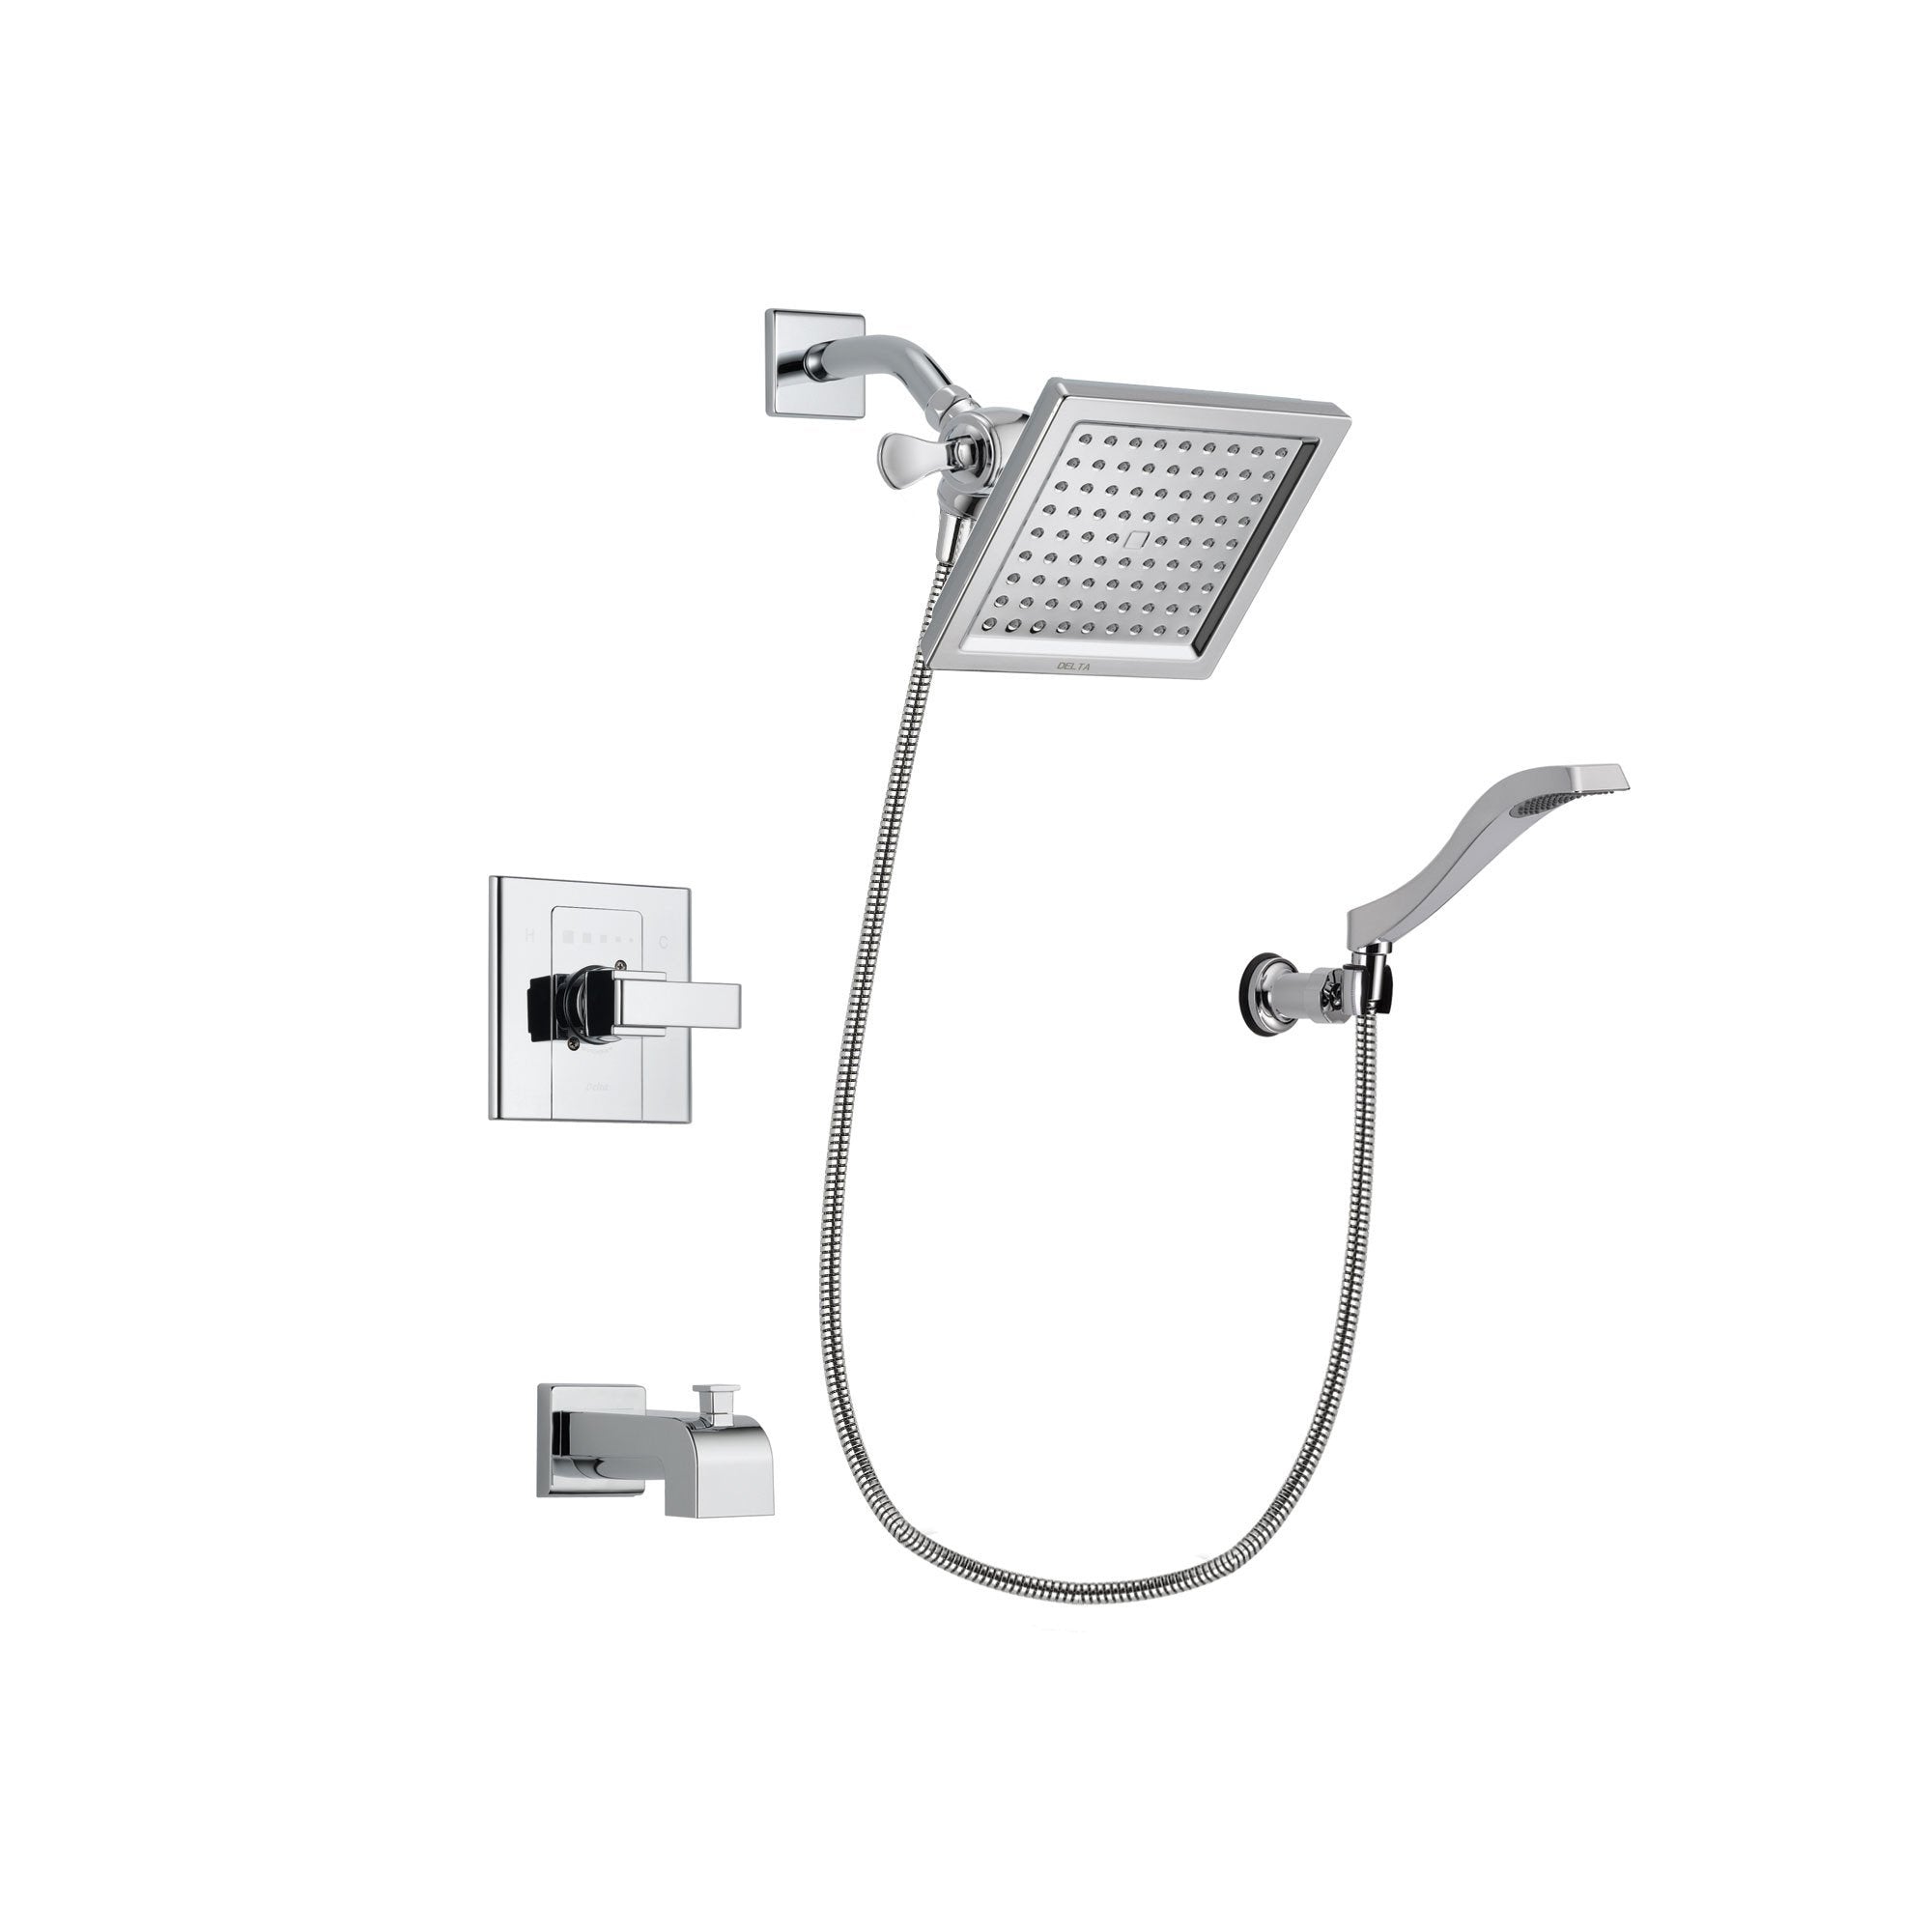 Delta Arzo Chrome Finish Tub and Shower Faucet System Package with 6.5-inch Square Rain Showerhead and Modern Handheld Shower Spray with Wall Bracket and Hose Includes Rough-in Valve and Tub Spout DSP0027V